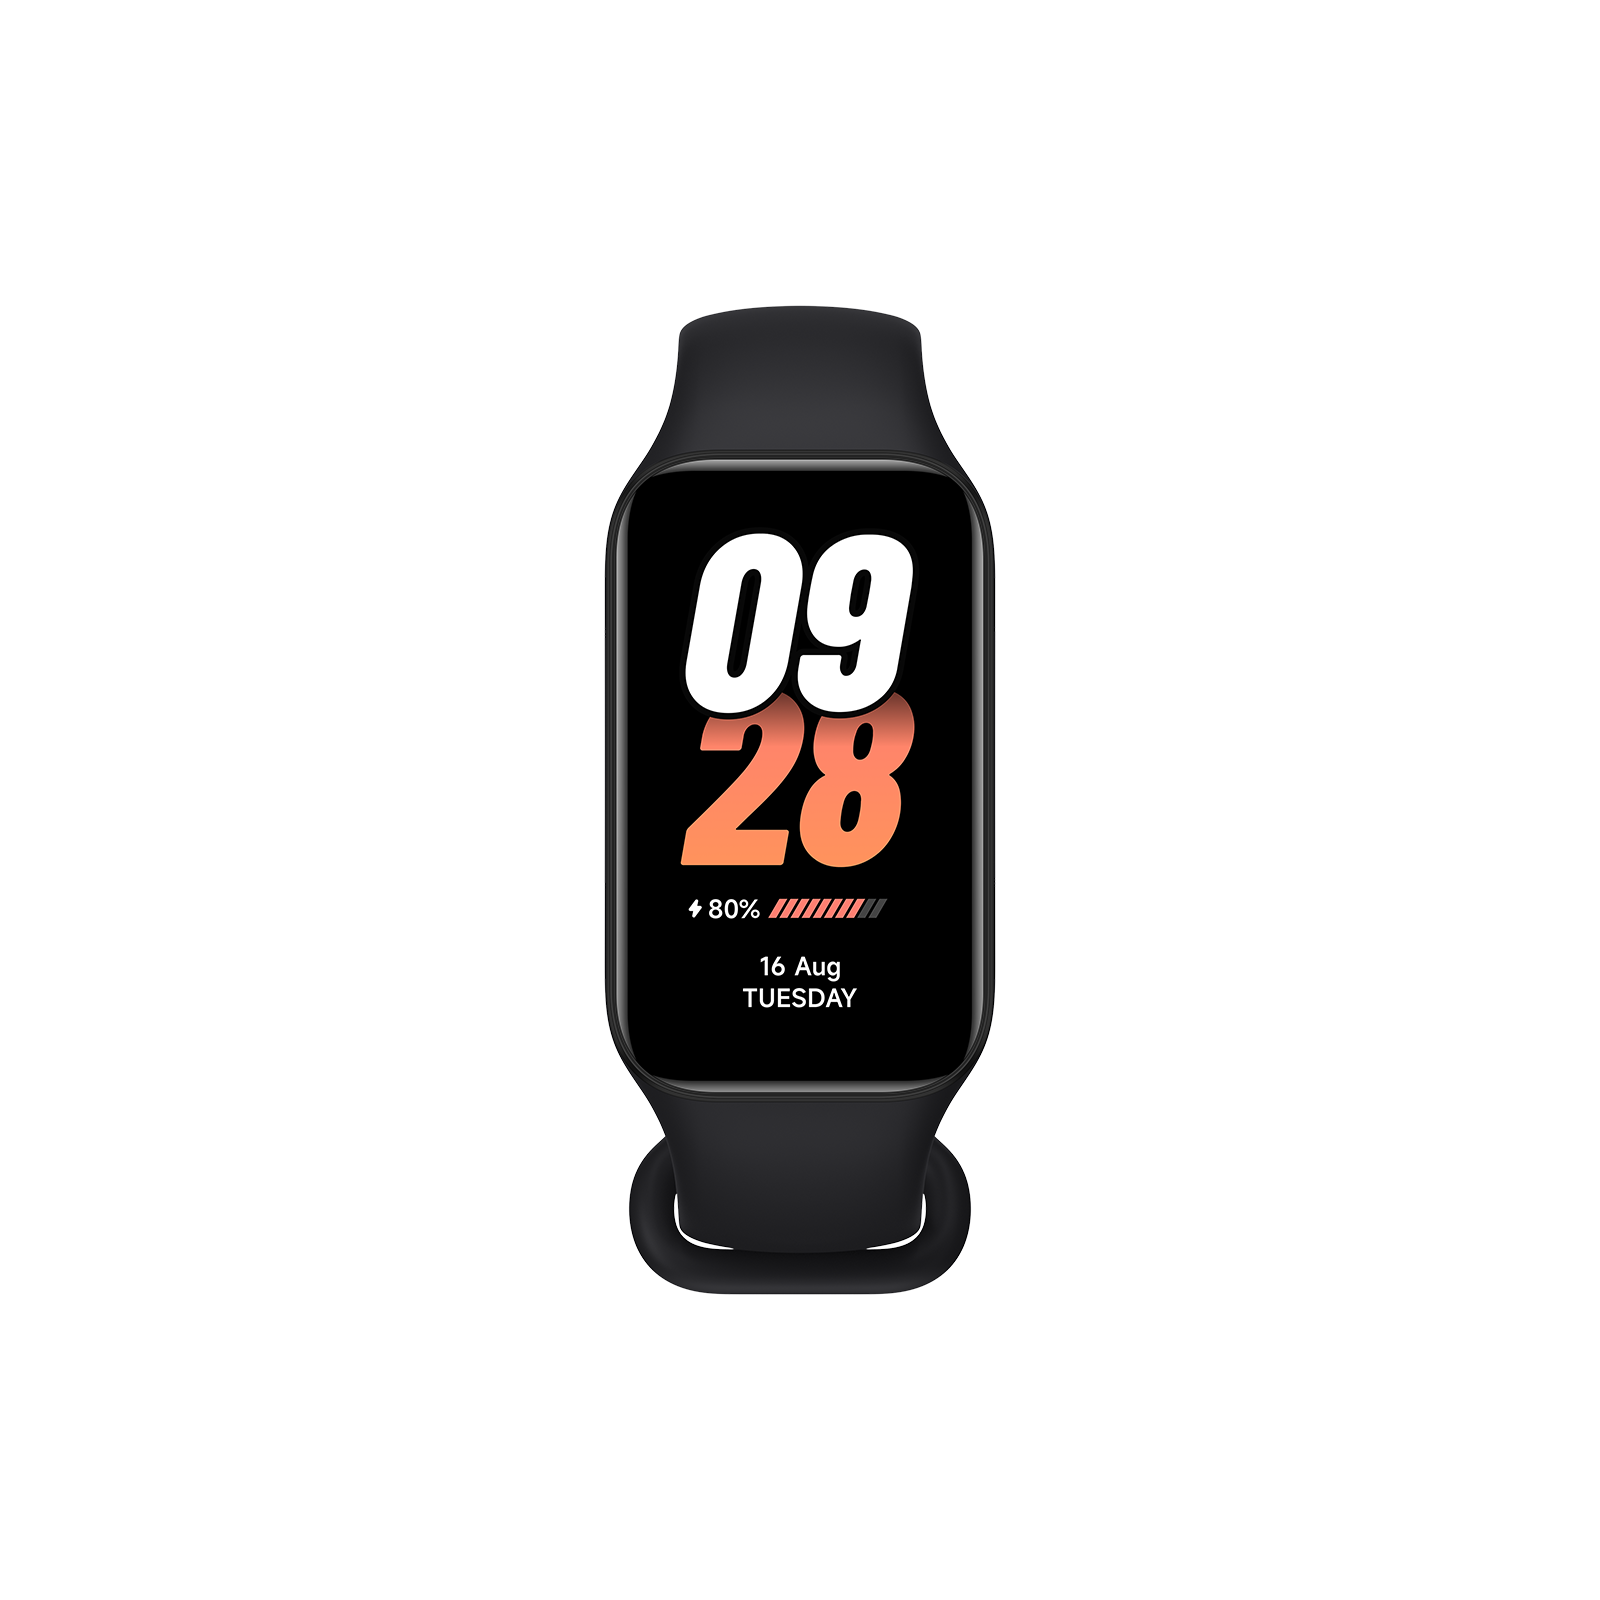 Xiaomi Smart Band 8 Pro launched: Blurring the line between tracker and  watch